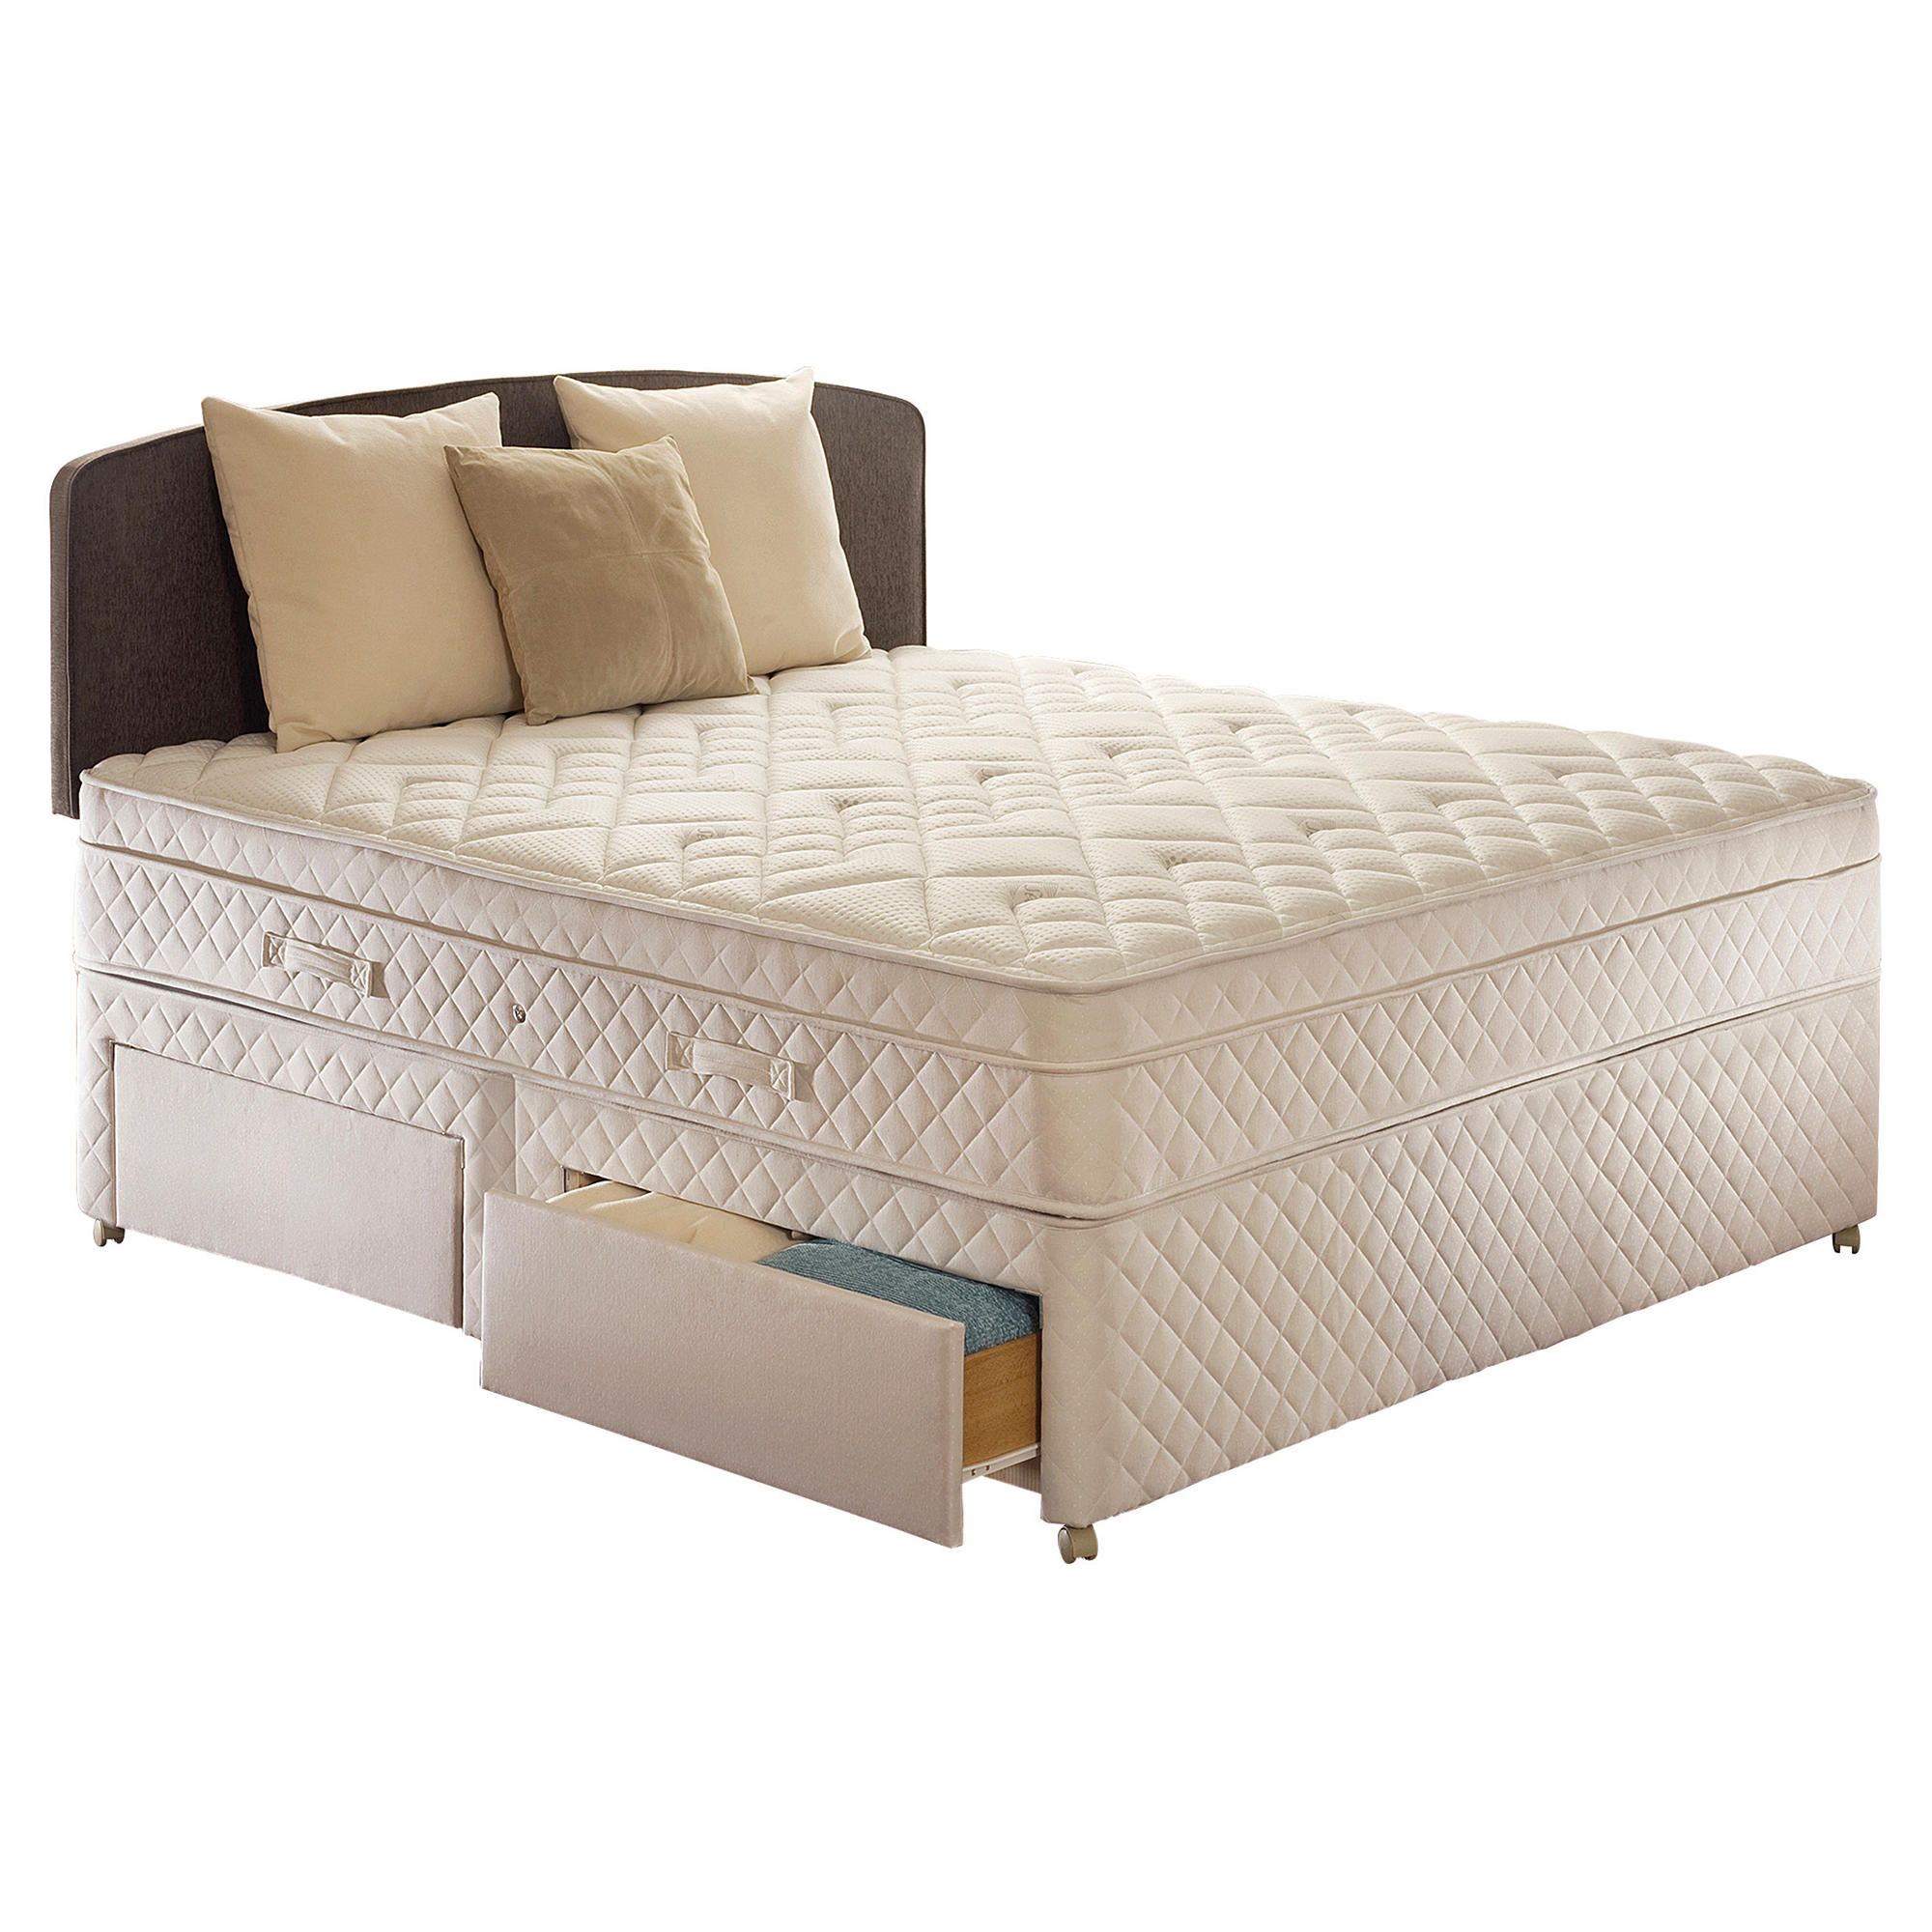 Sealy Diamond Excellence King 4 Drawer Divan Bed at Tescos Direct